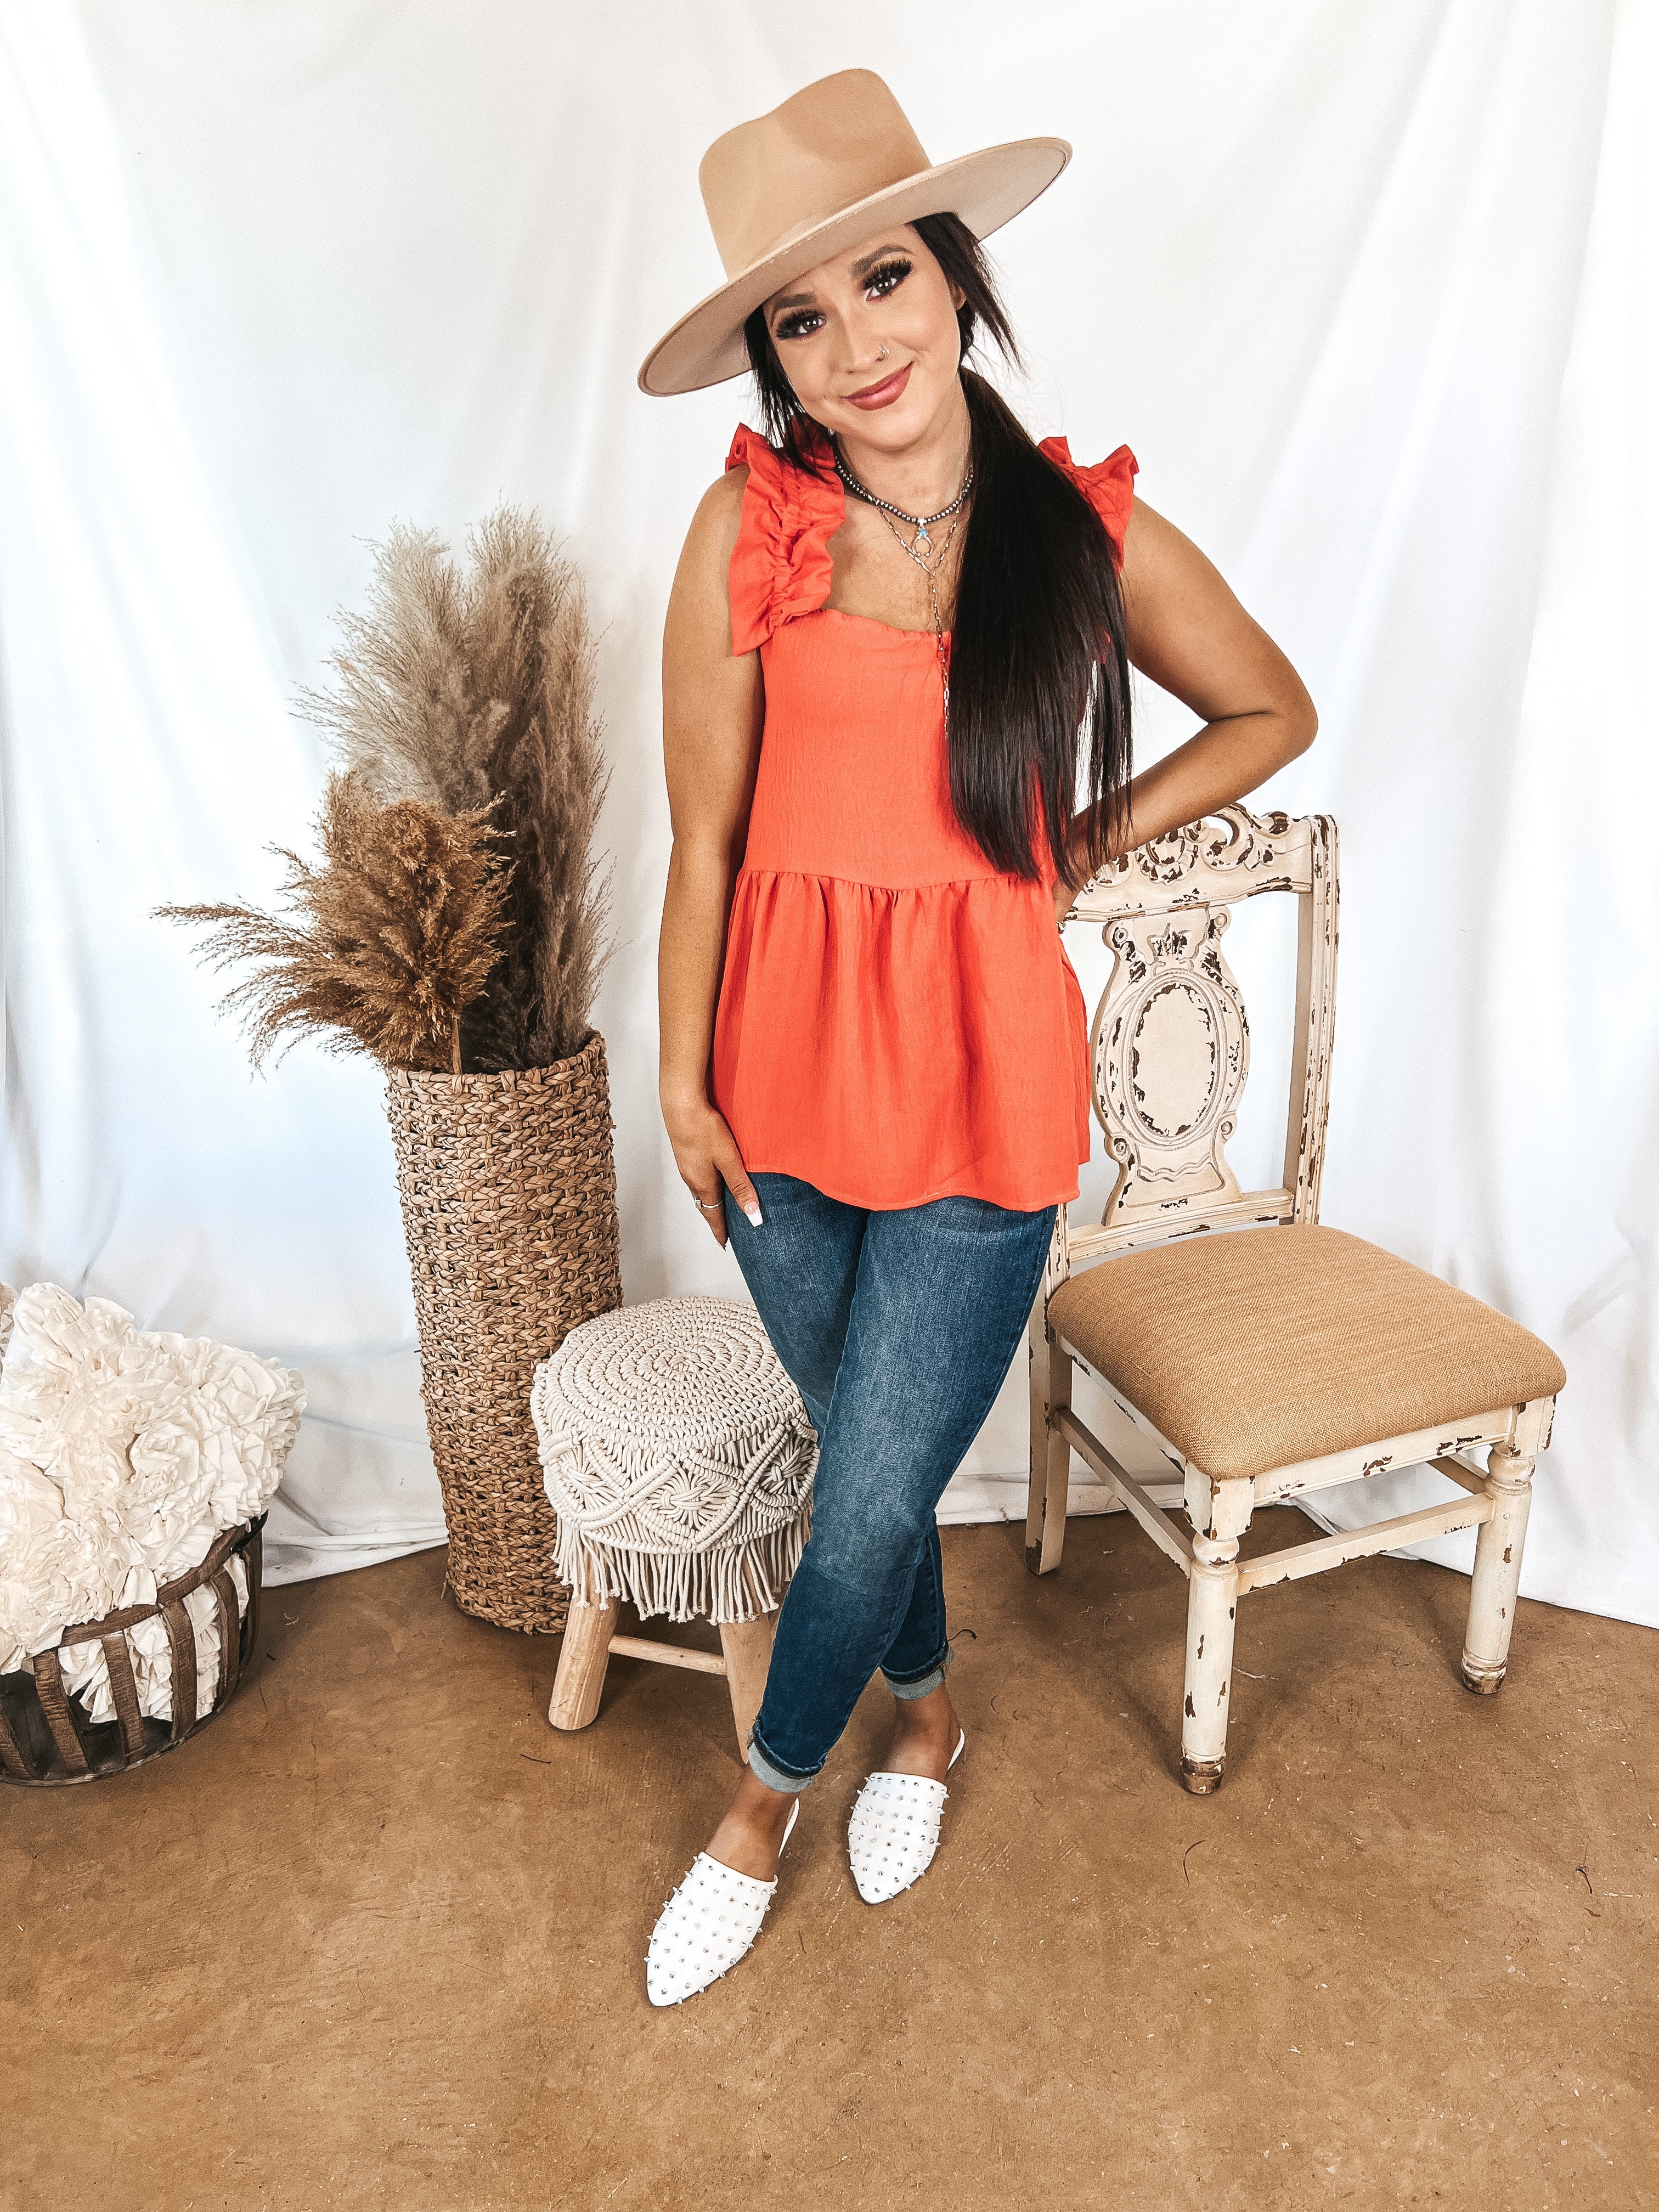 Instant Confidence Ruffle Strap Babydoll Tank Top in Coral Orange - Giddy Up Glamour Boutique